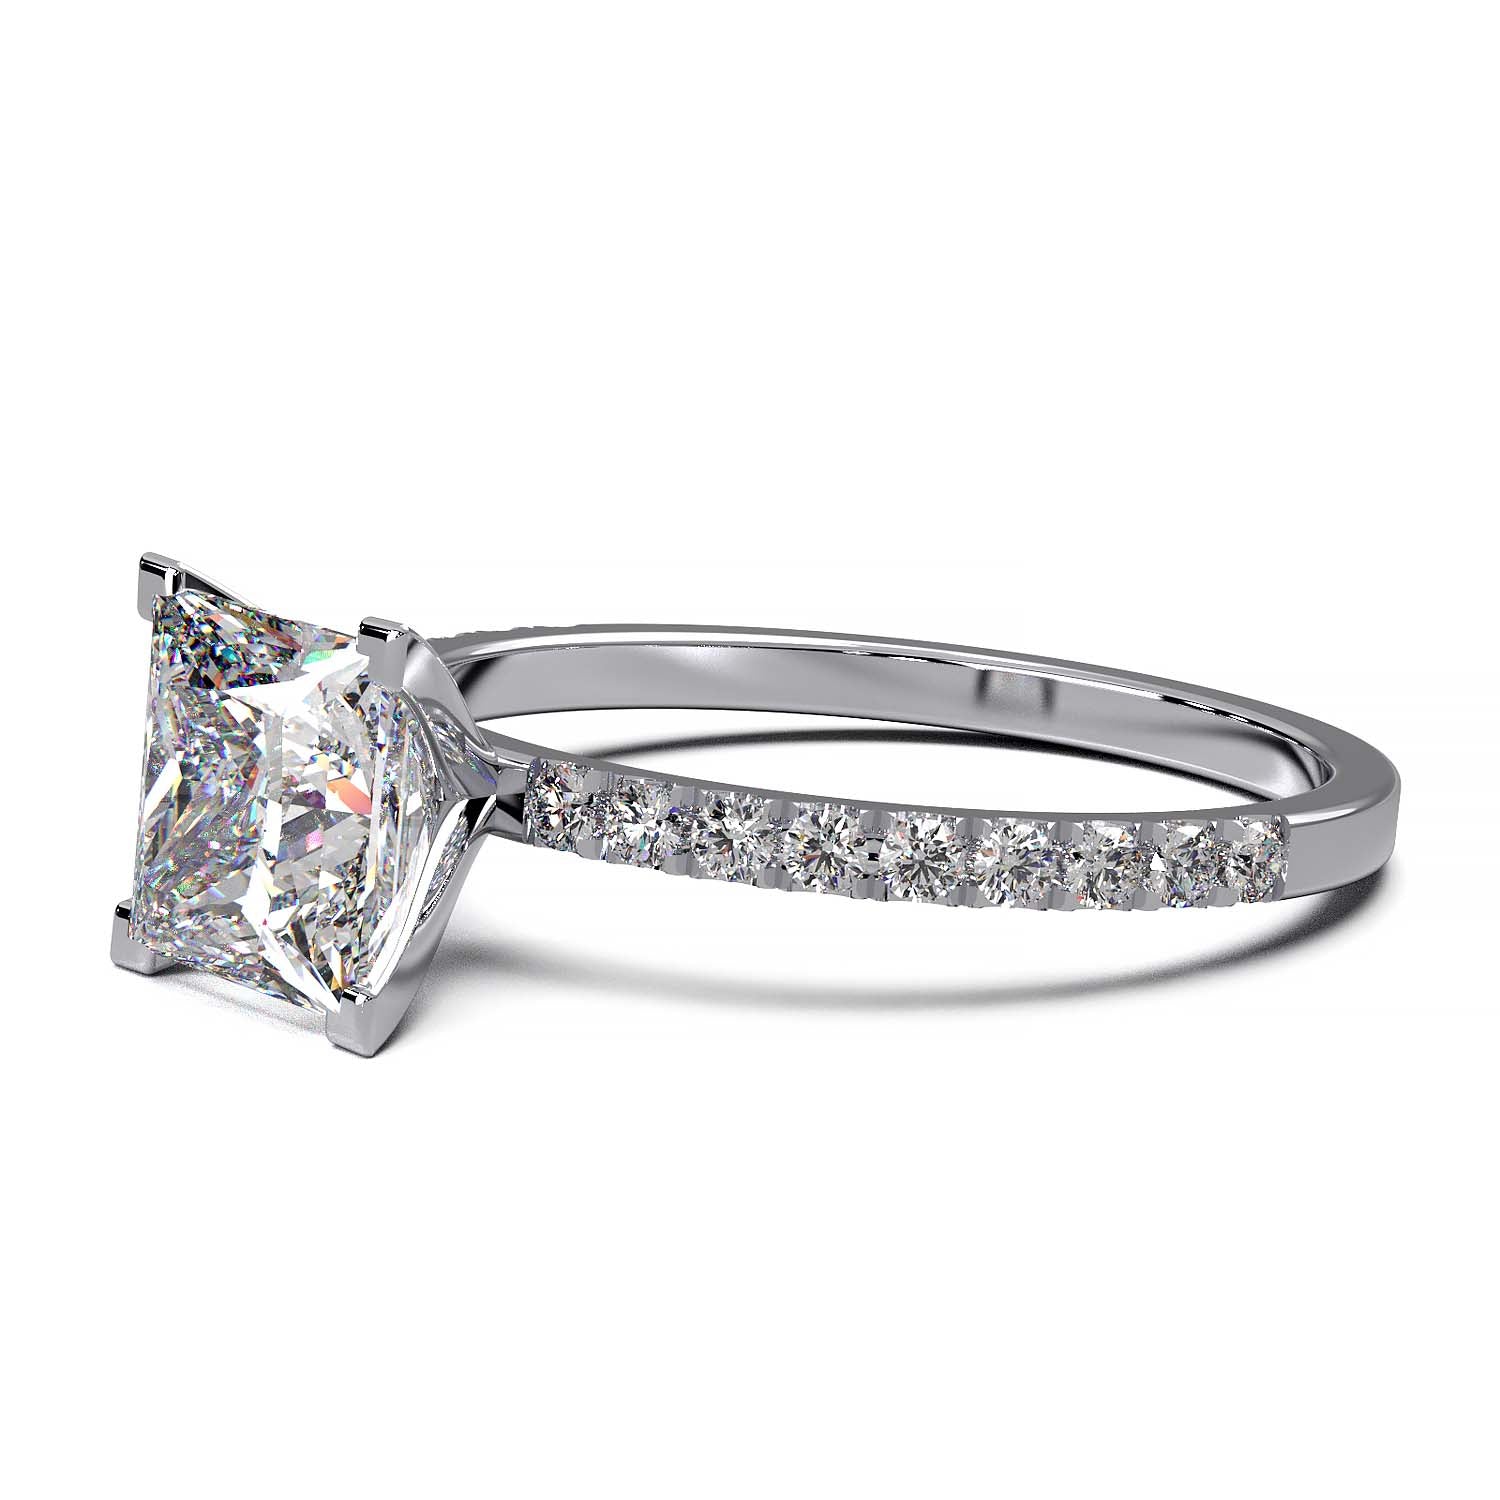 1.25 carat princess cut lab-grown diamond engagement ring with pave band and flush-fit base for a matching band alignment.